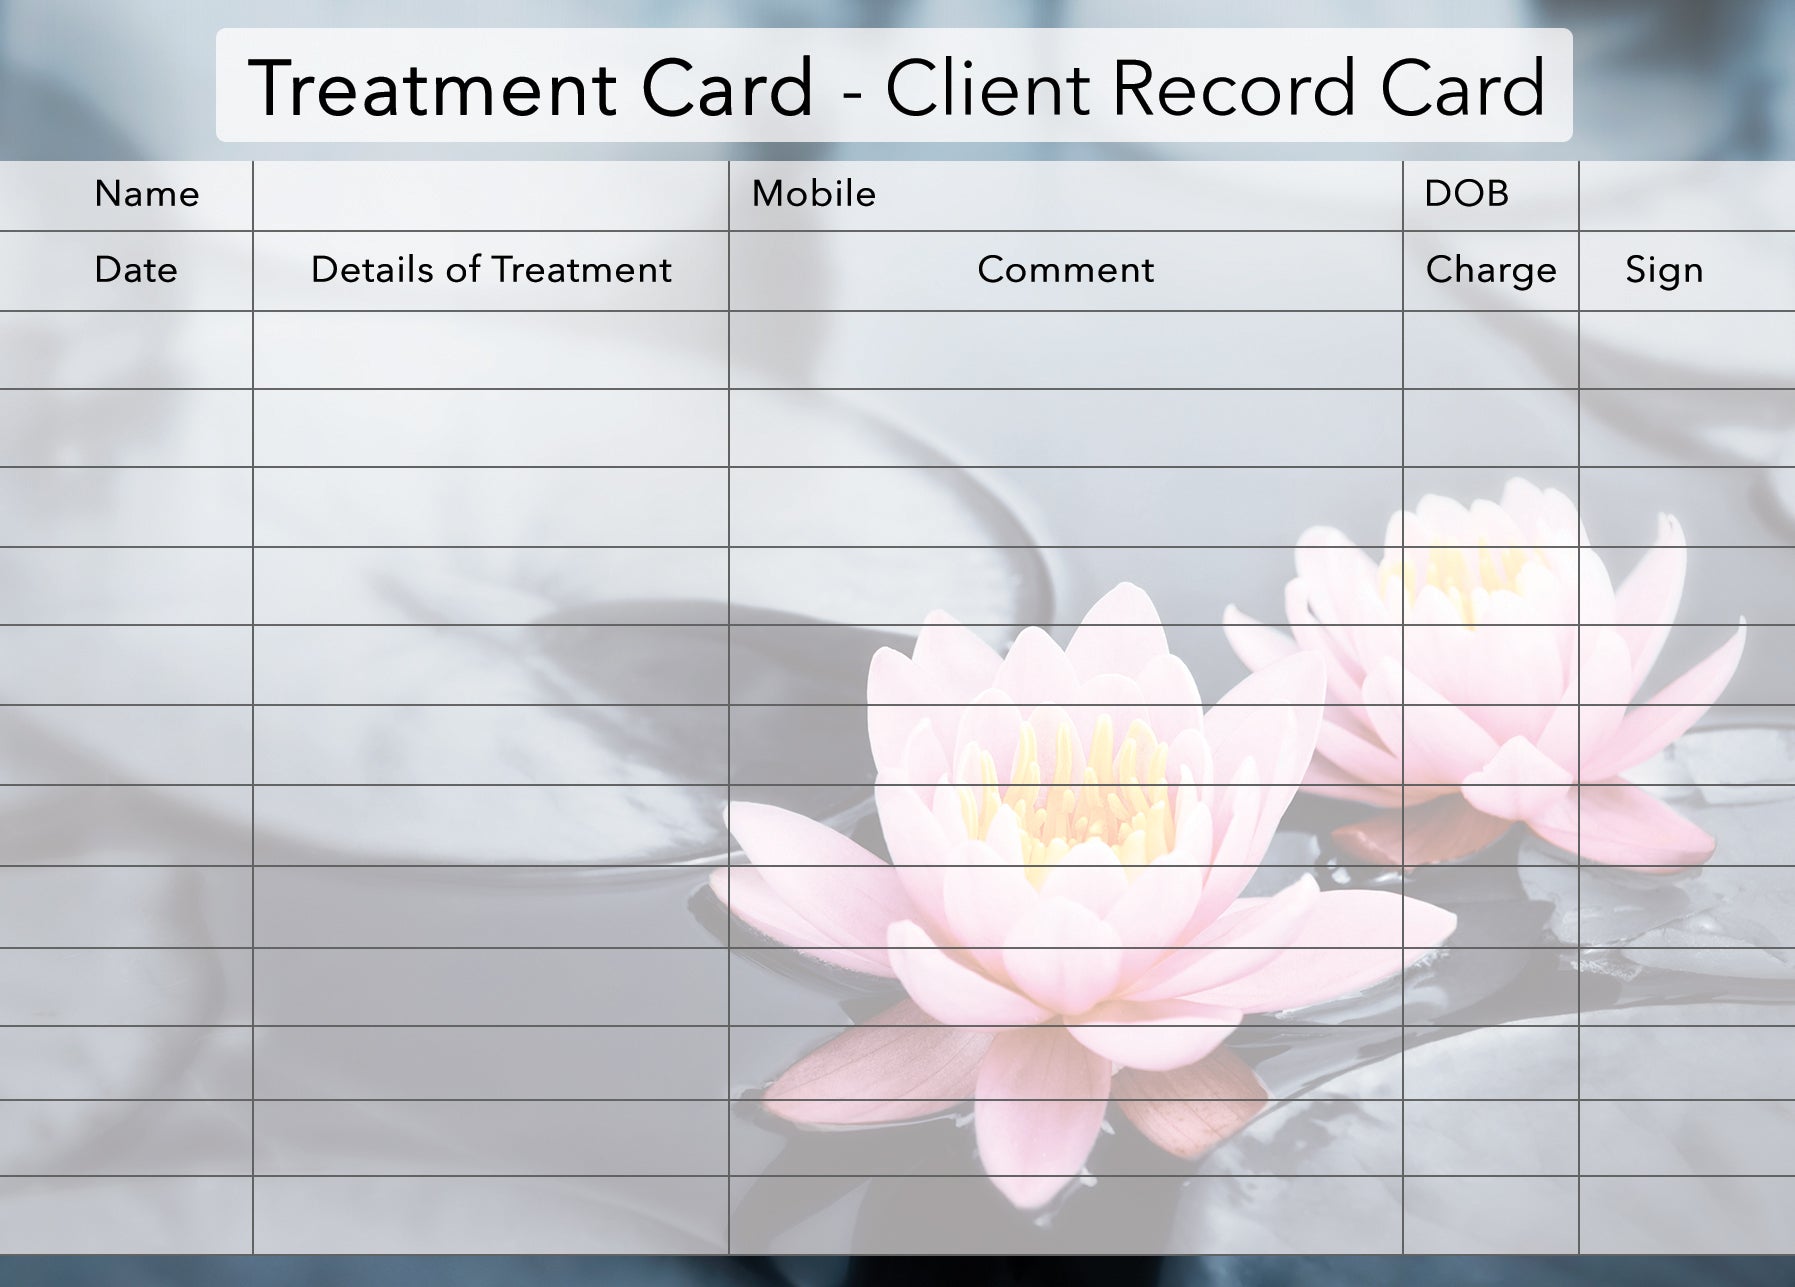 new-additional-treatment-client-card-treatment-free-nude-porn-photos